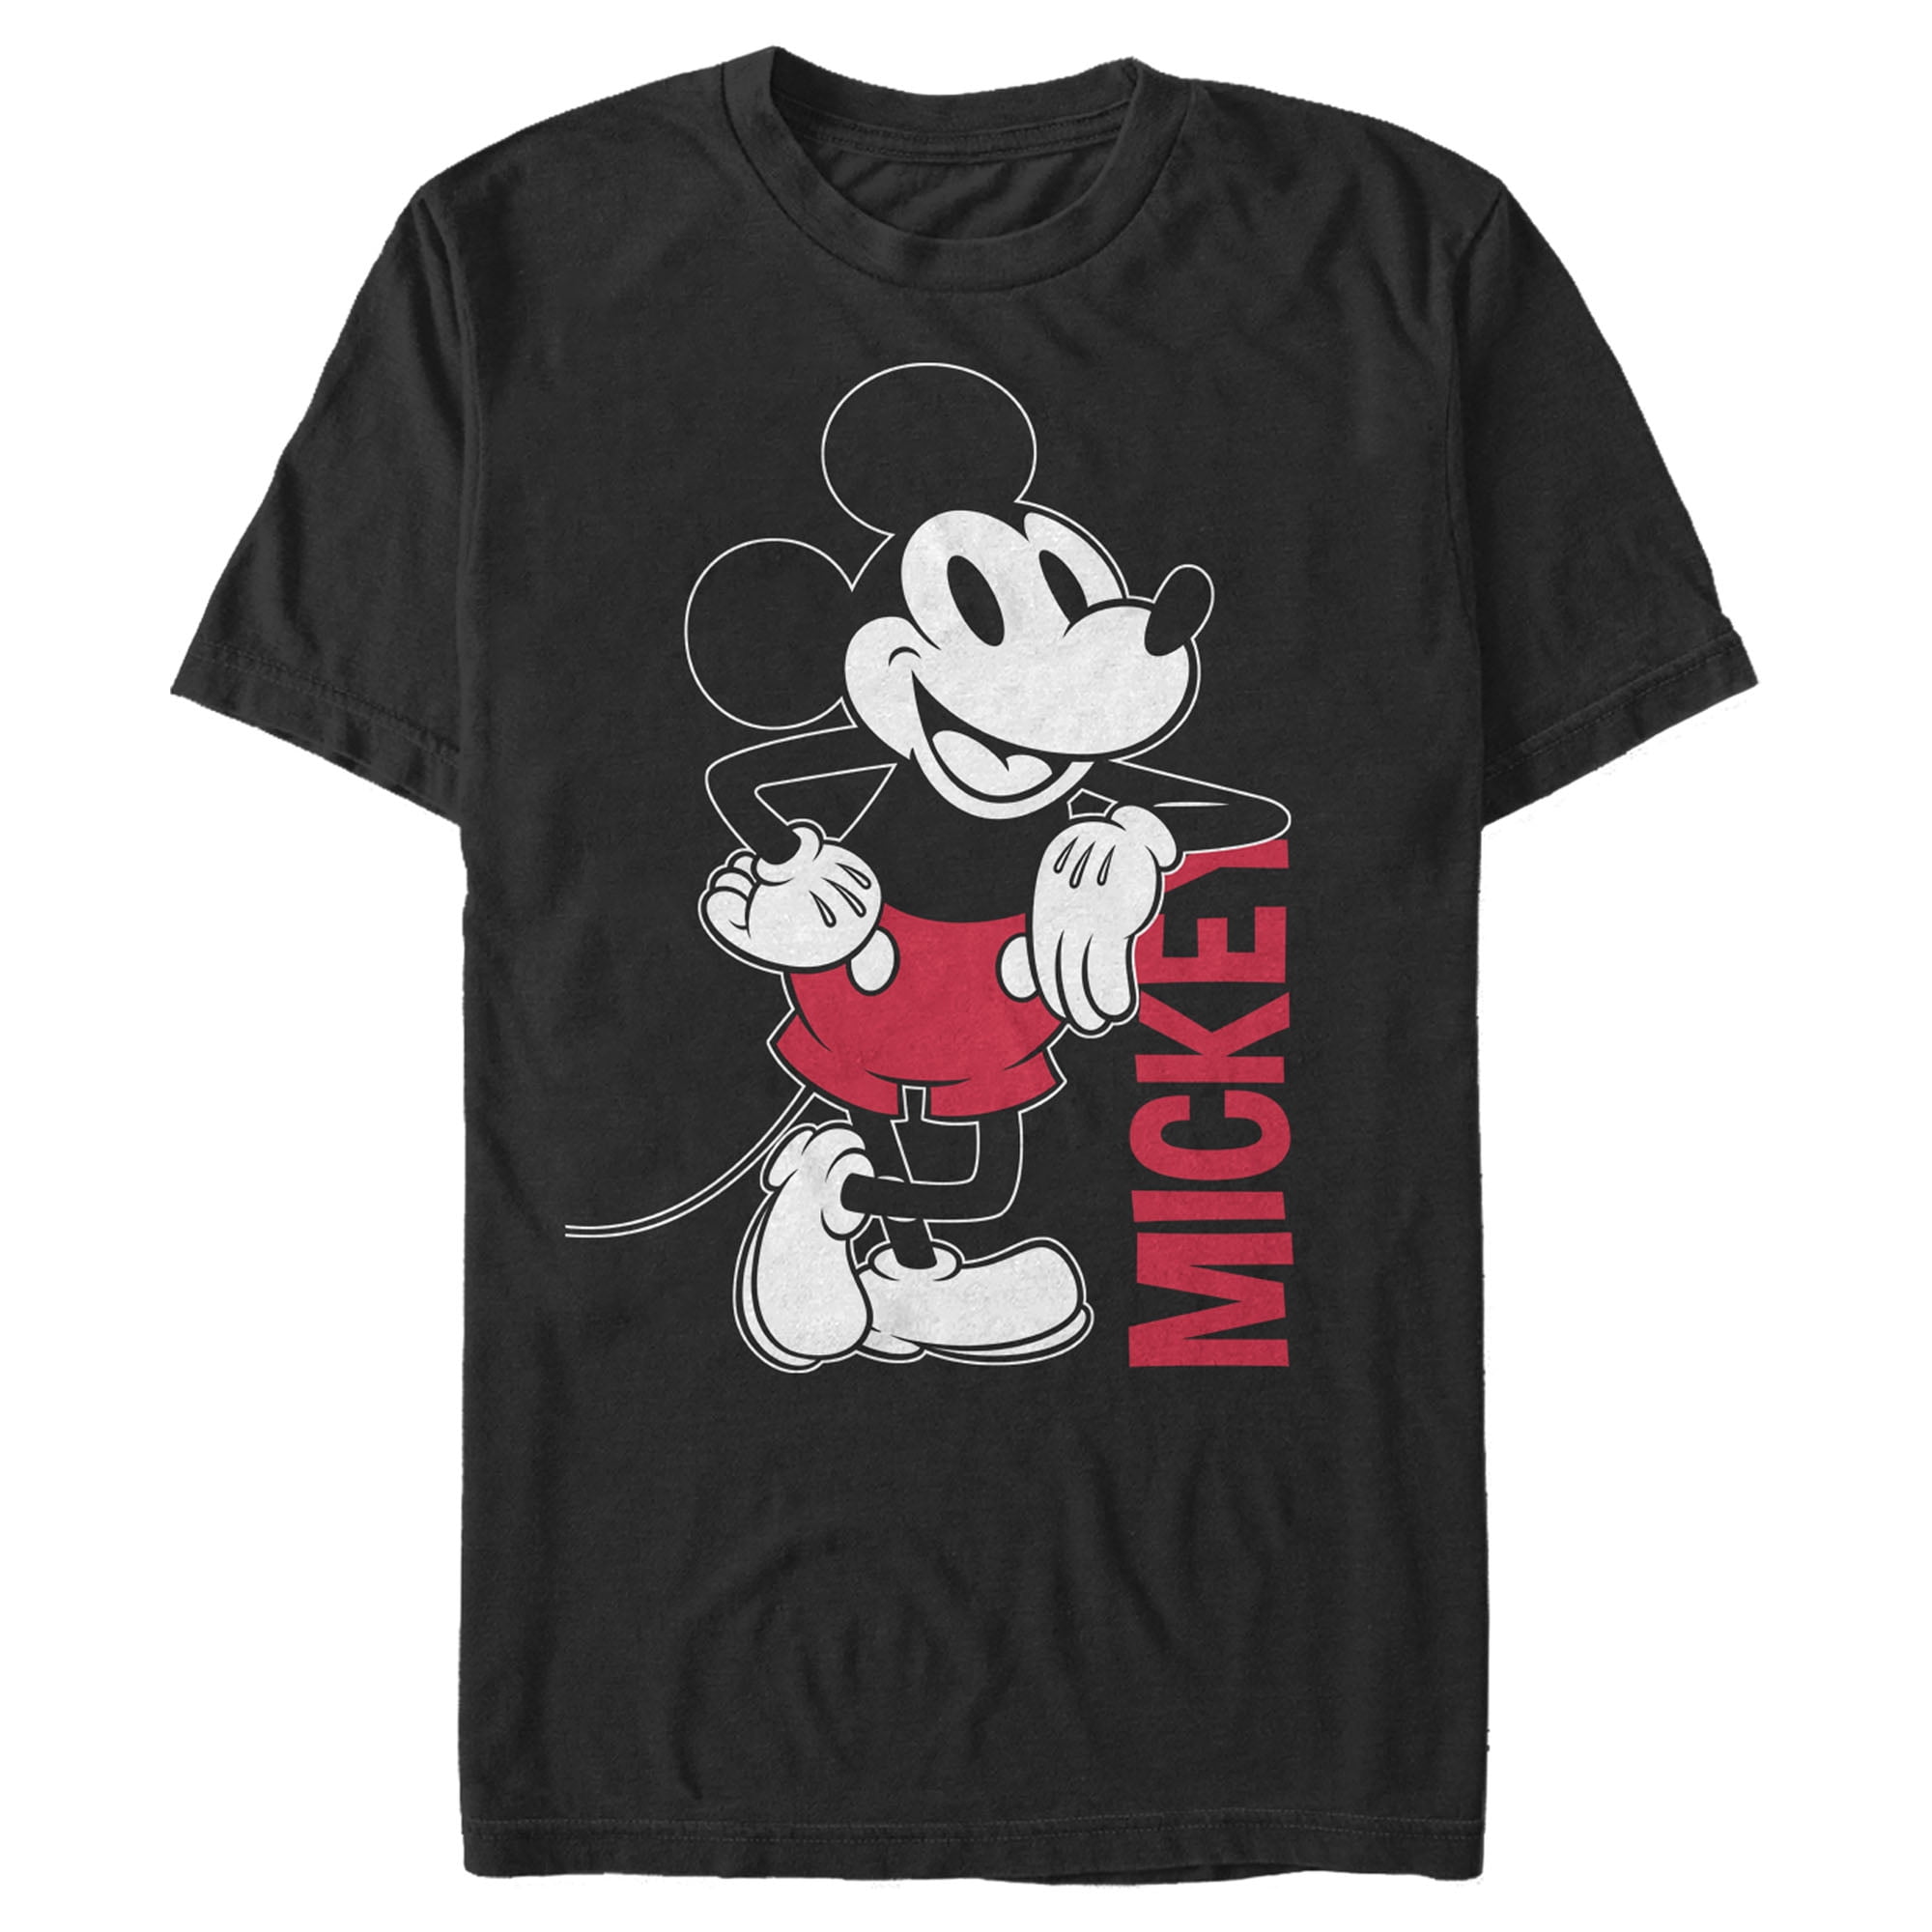 Vintage Mickey Mouse Shirts